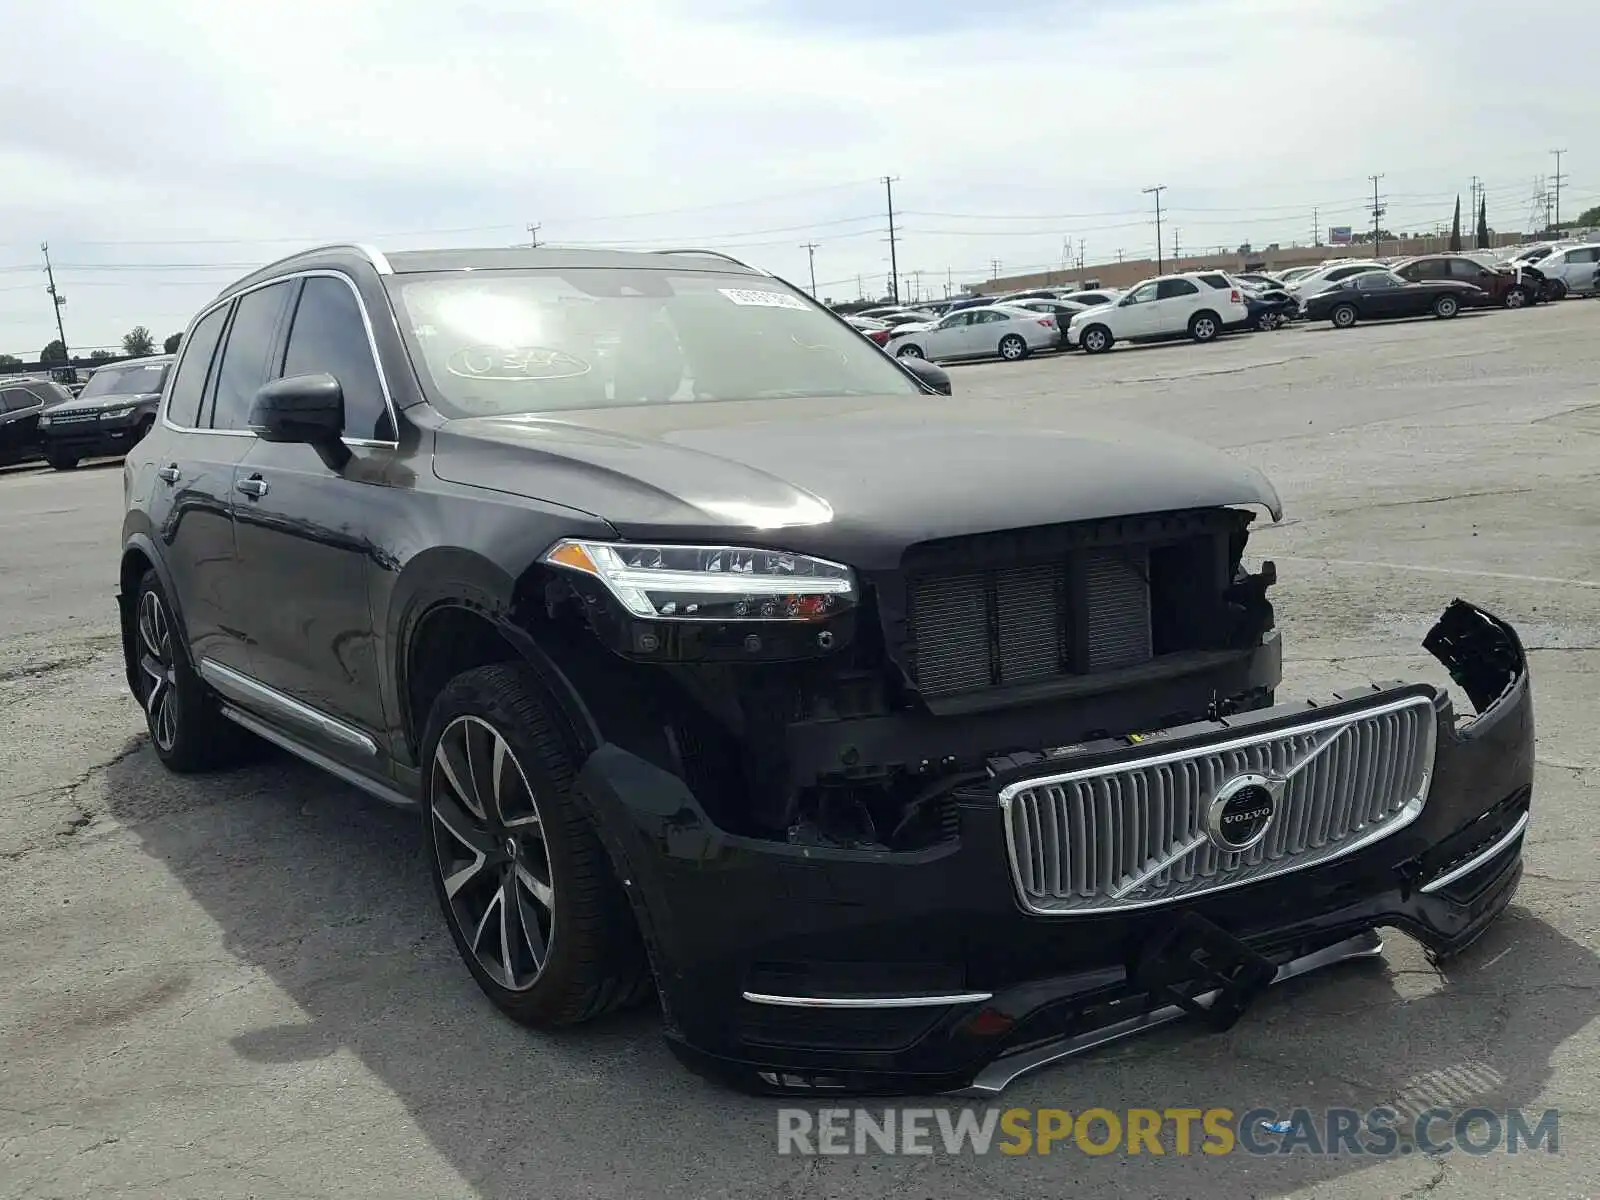 1 Photograph of a damaged car YV4A22PL8K1484343 VOLVO XC90 T6 IN 2019